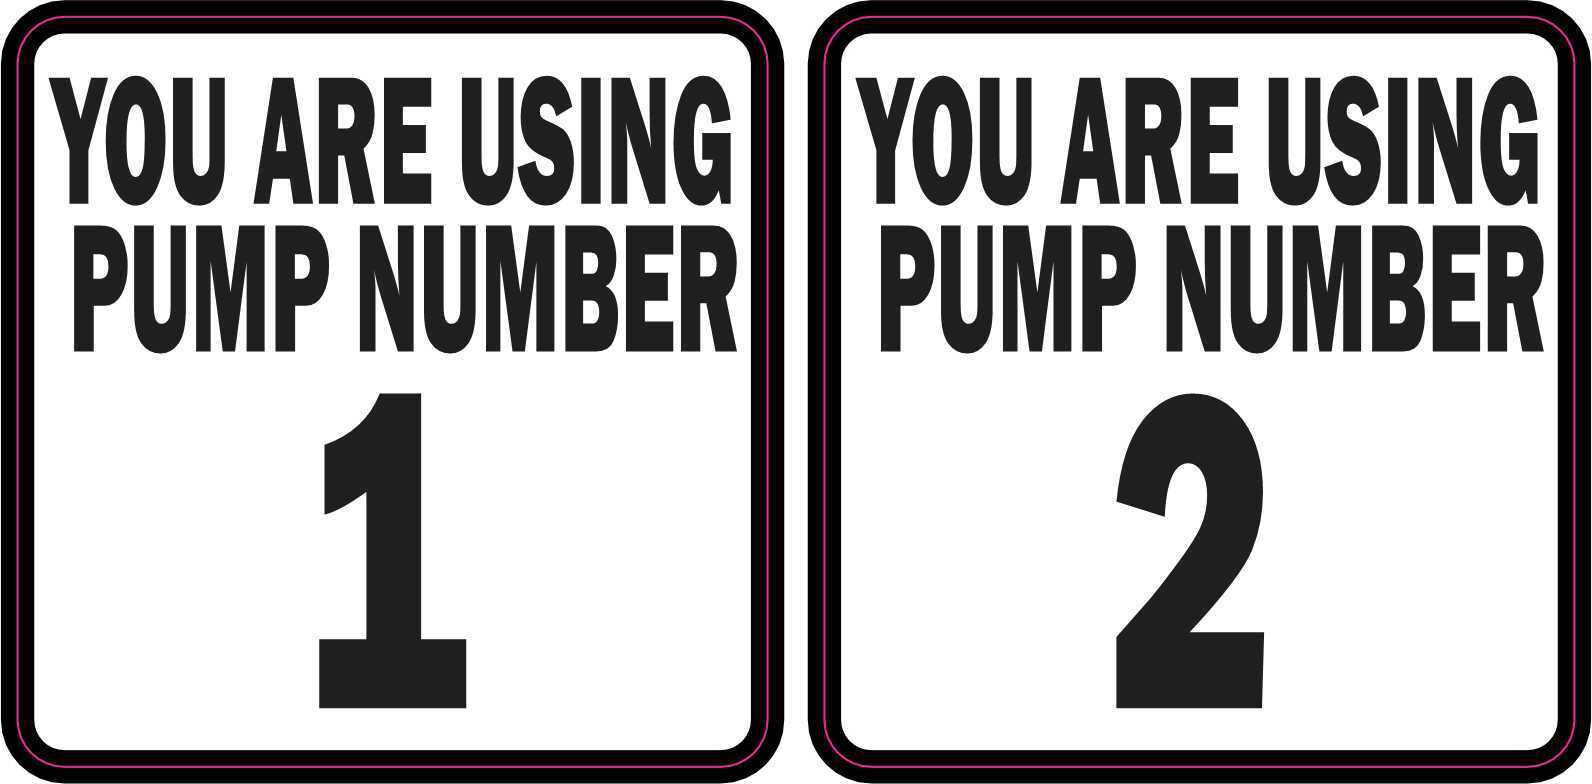 2.5in x 2.5in Pump Number 1 and 2 Vinyl Stickers Business Sign Label Decals